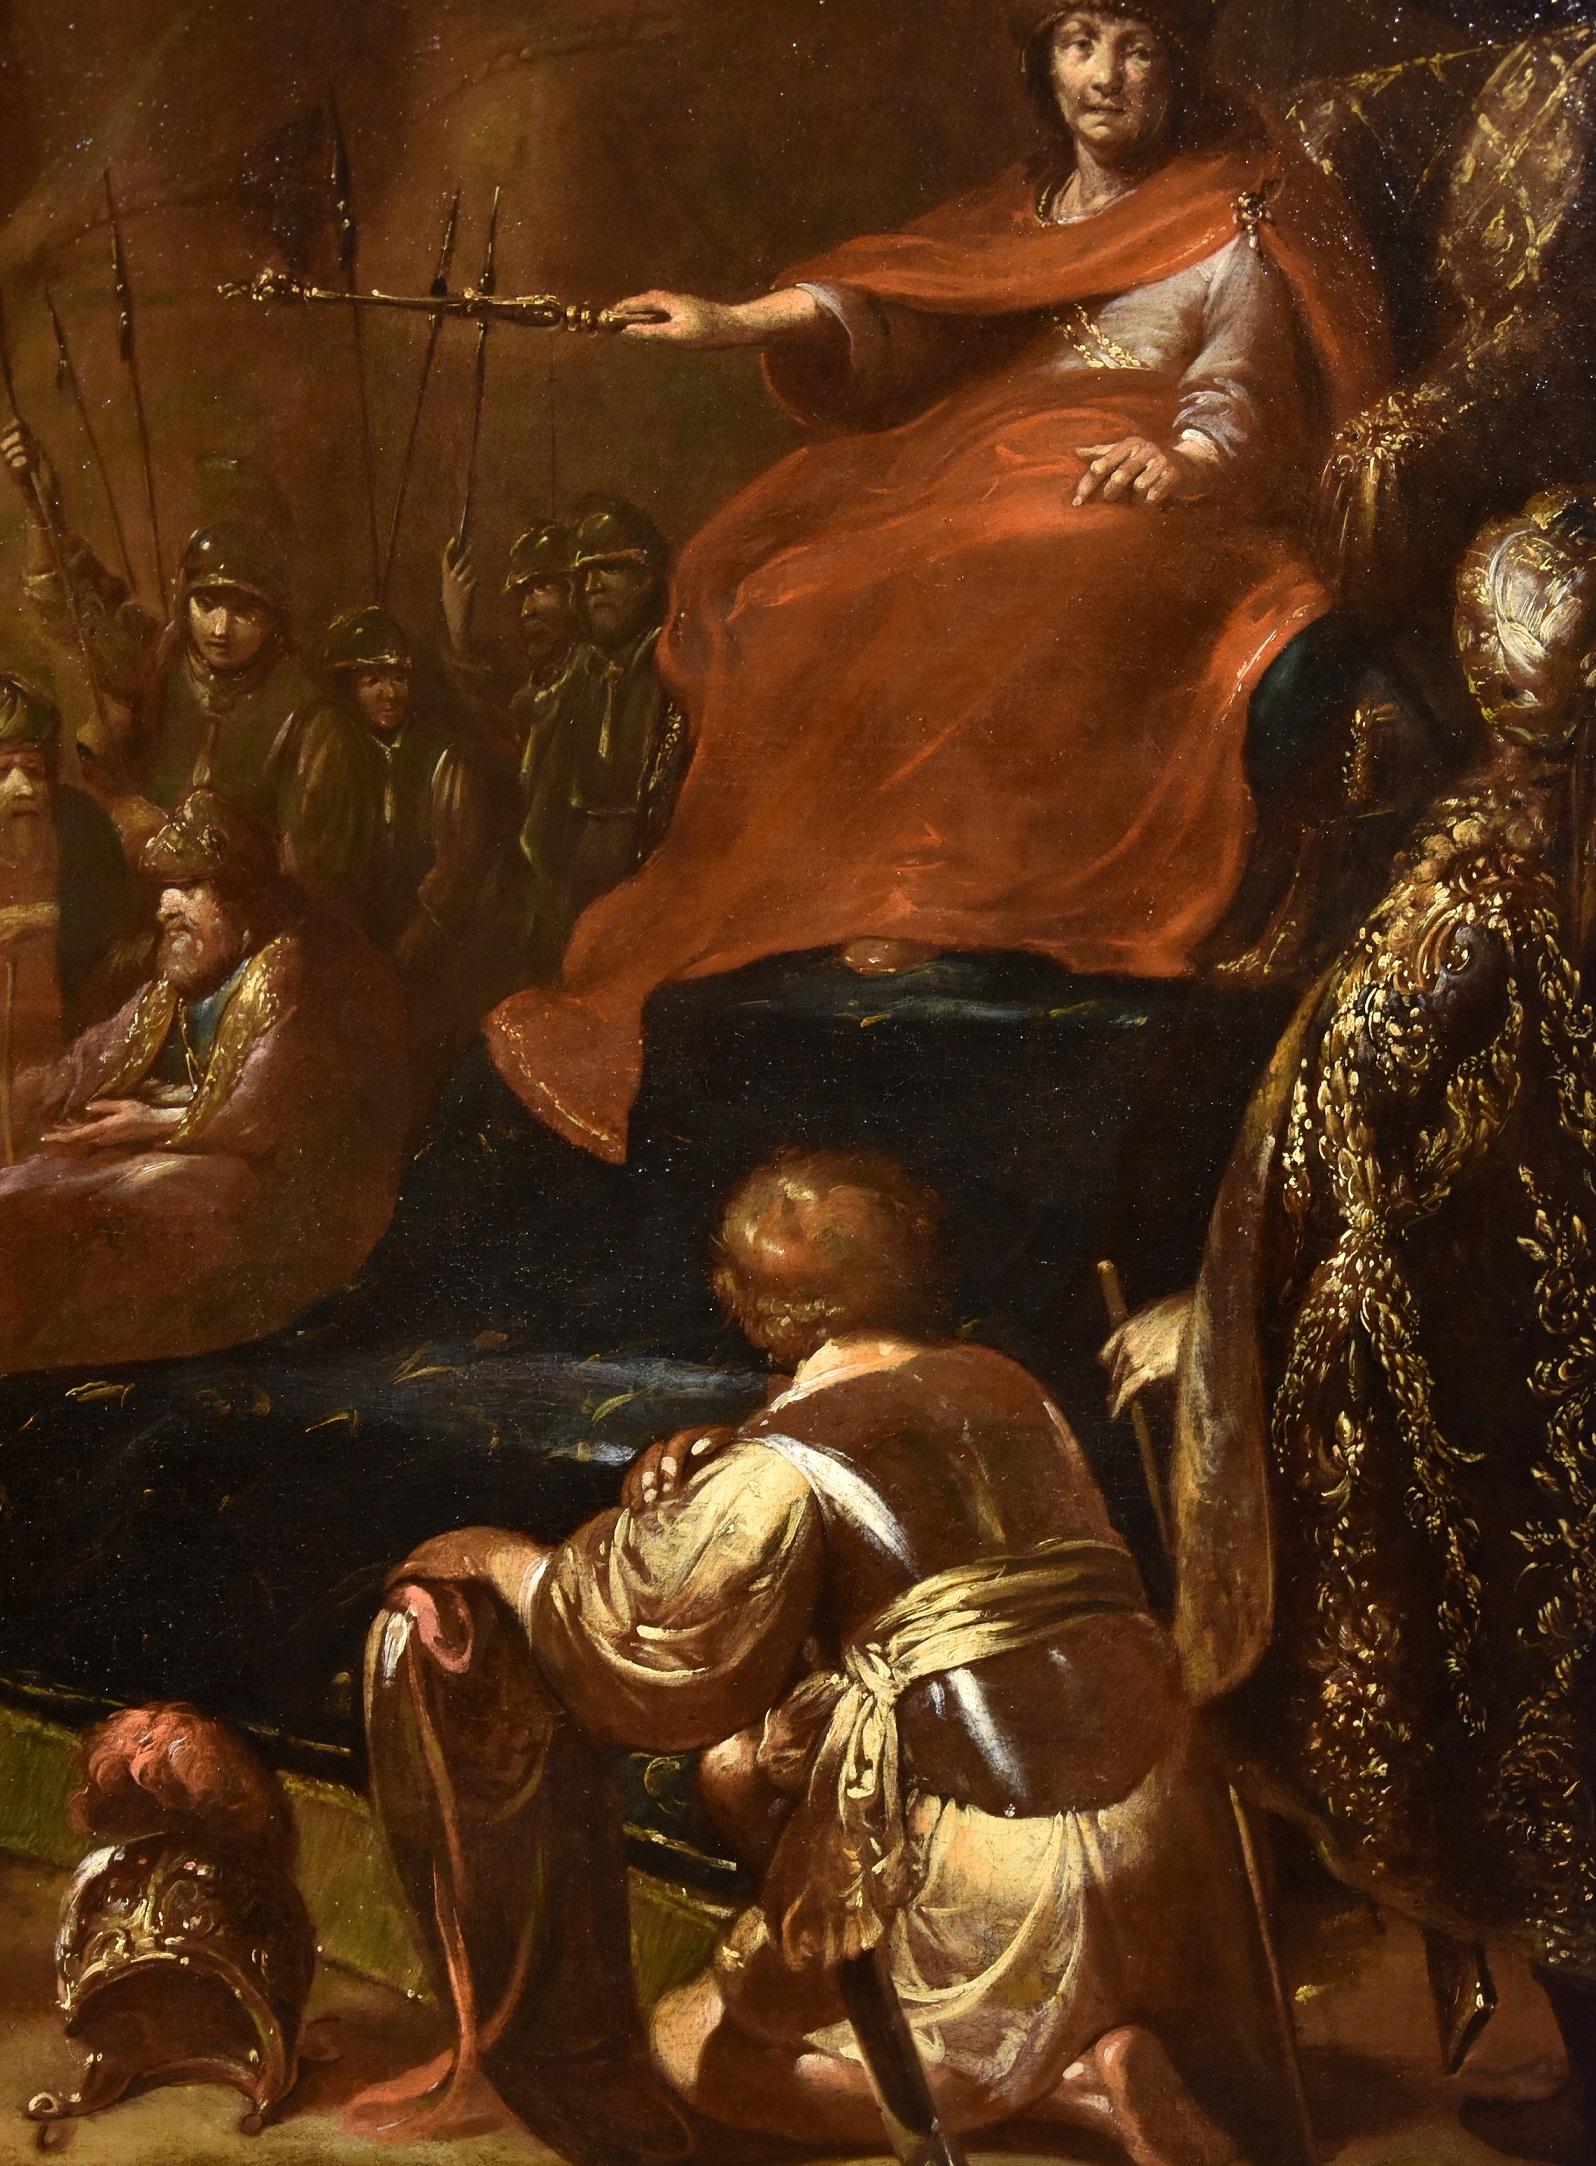 Antichità Castelbarco SRLS is proud to present:

Charles le Brun (Paris 1619 - 1690) Circle of
Alexander the Great seated on throne gives audience to satraps of the empire
Oil on canvas (90 x 142 cm. - In frame 114 x 168 cm.)

The composition